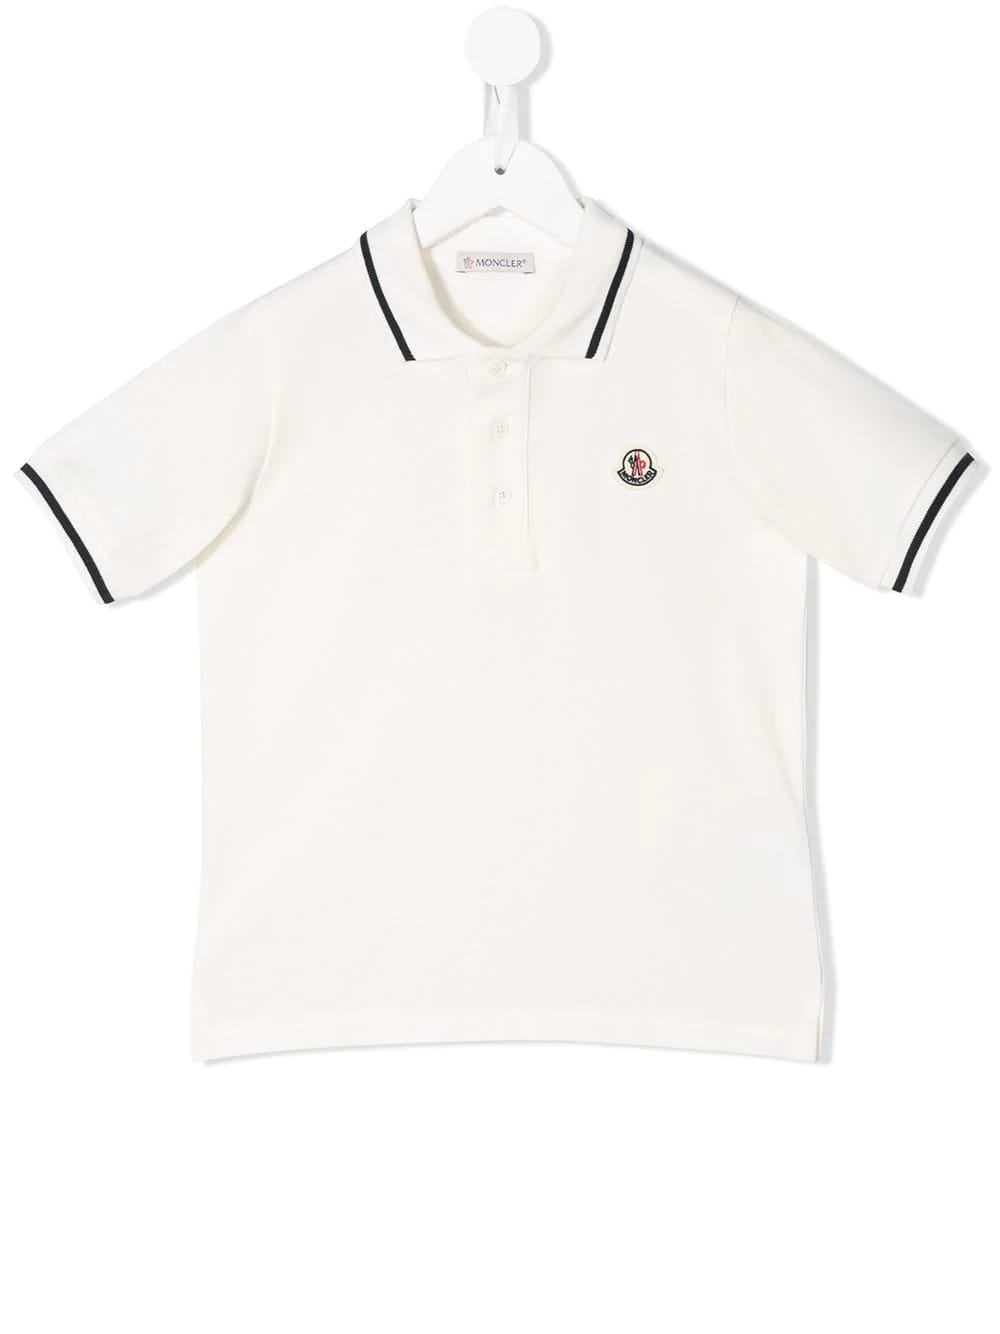 Moncler White Polo Shirt With Small Logo And Contrast Profiles